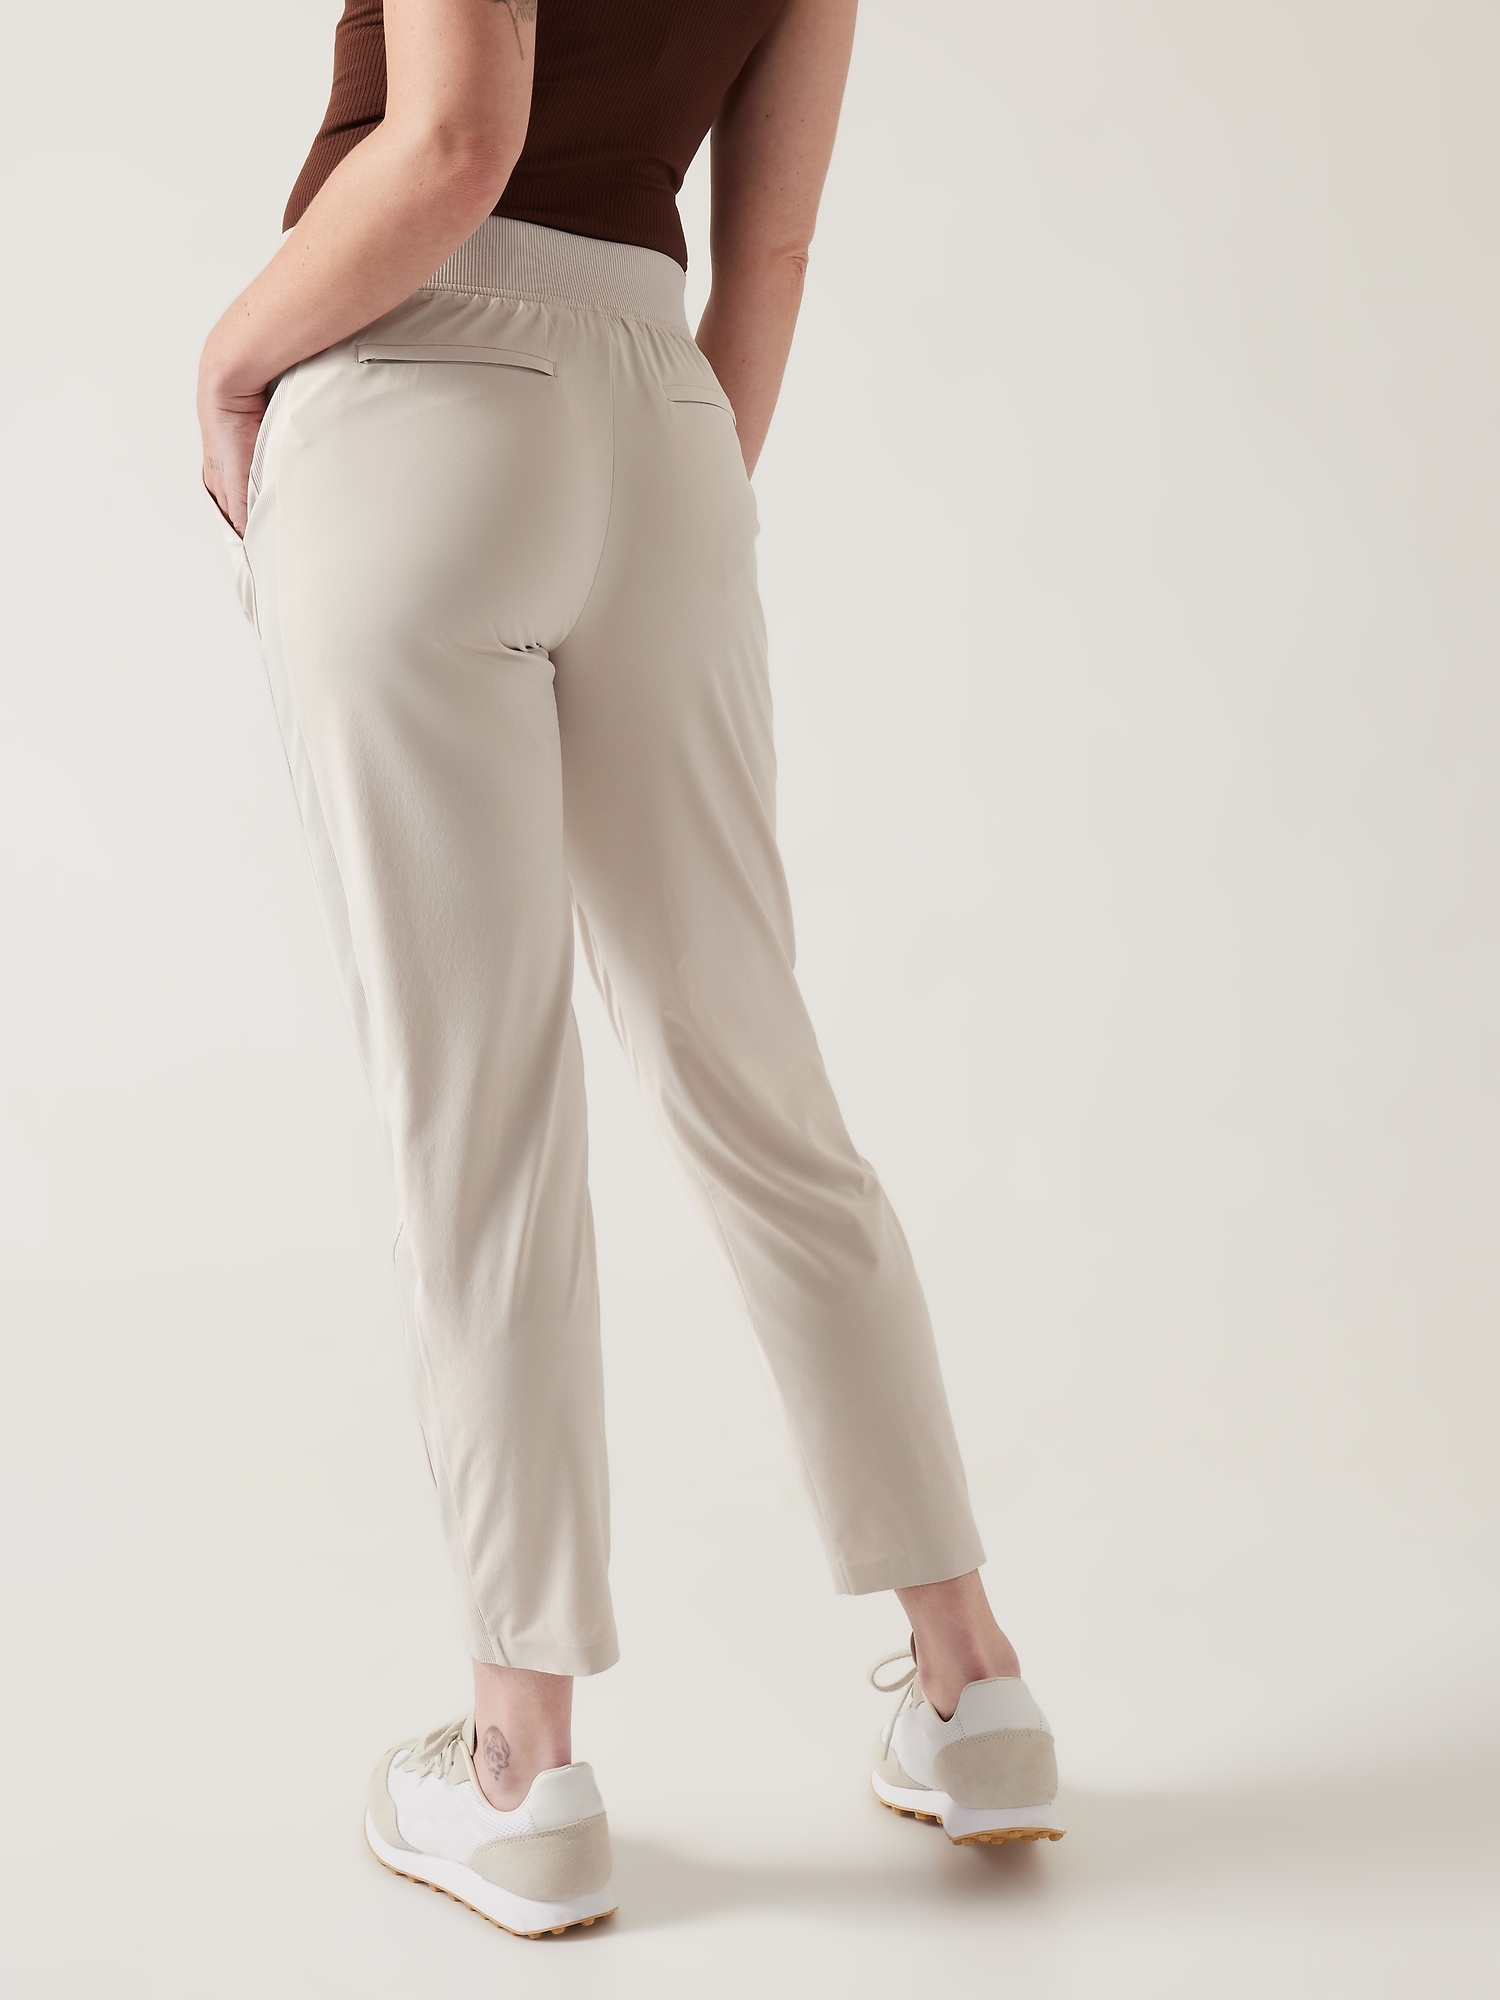 Brooklyn Ankle Pant Athleta Ankle Pants, Casual Outfits,, 40% OFF